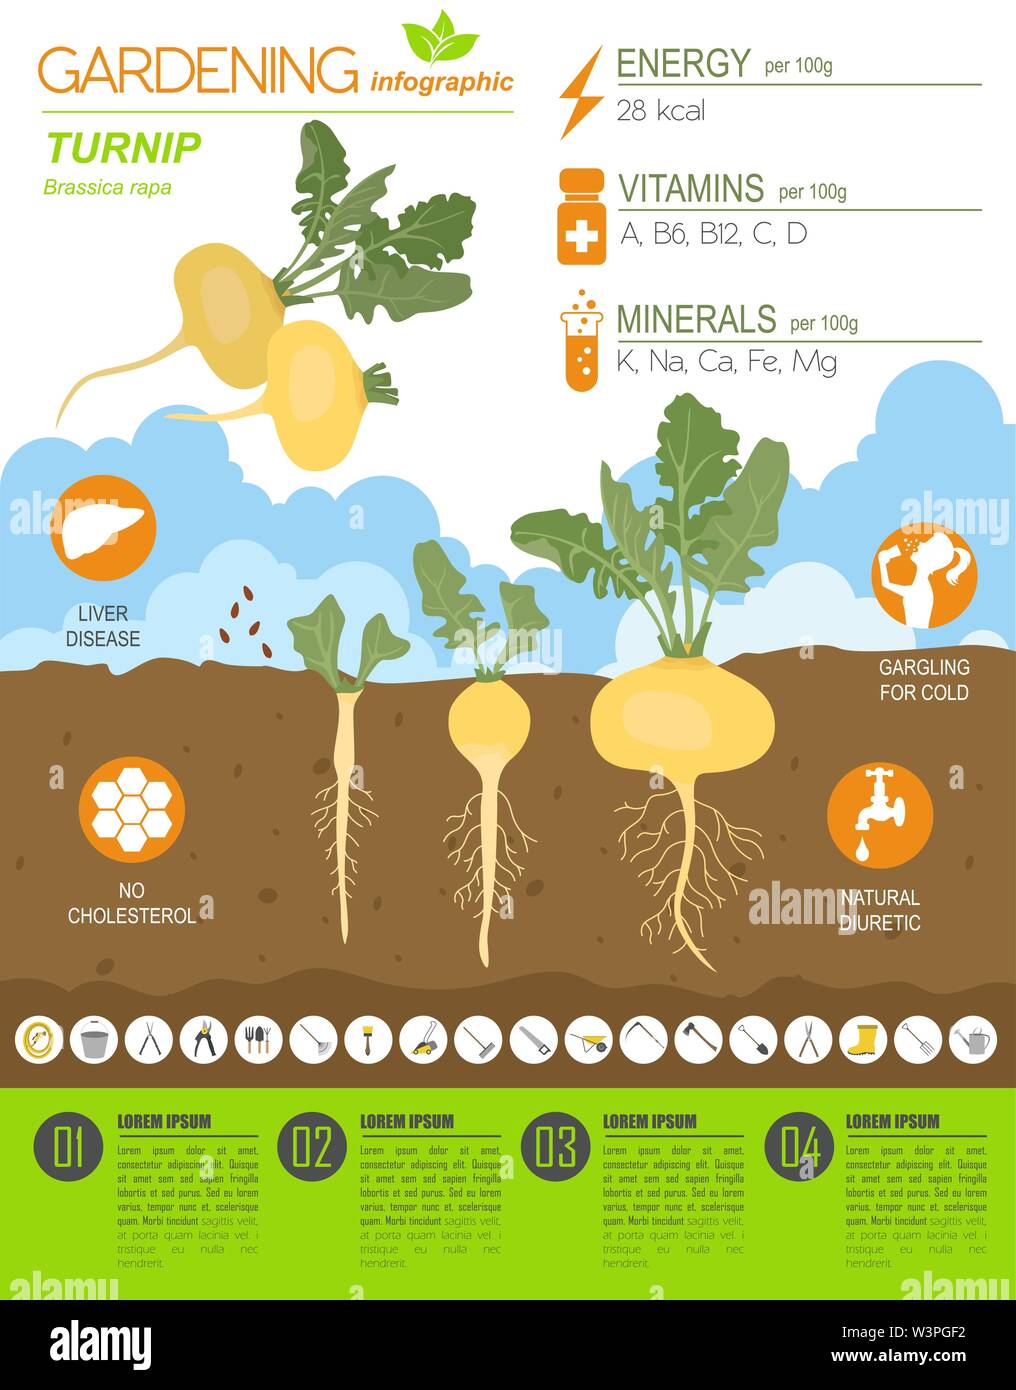 Turnip beneficial features graphic template. Gardening, farming infographic, how it grows. Flat style design. Vector illustration Stock Vector